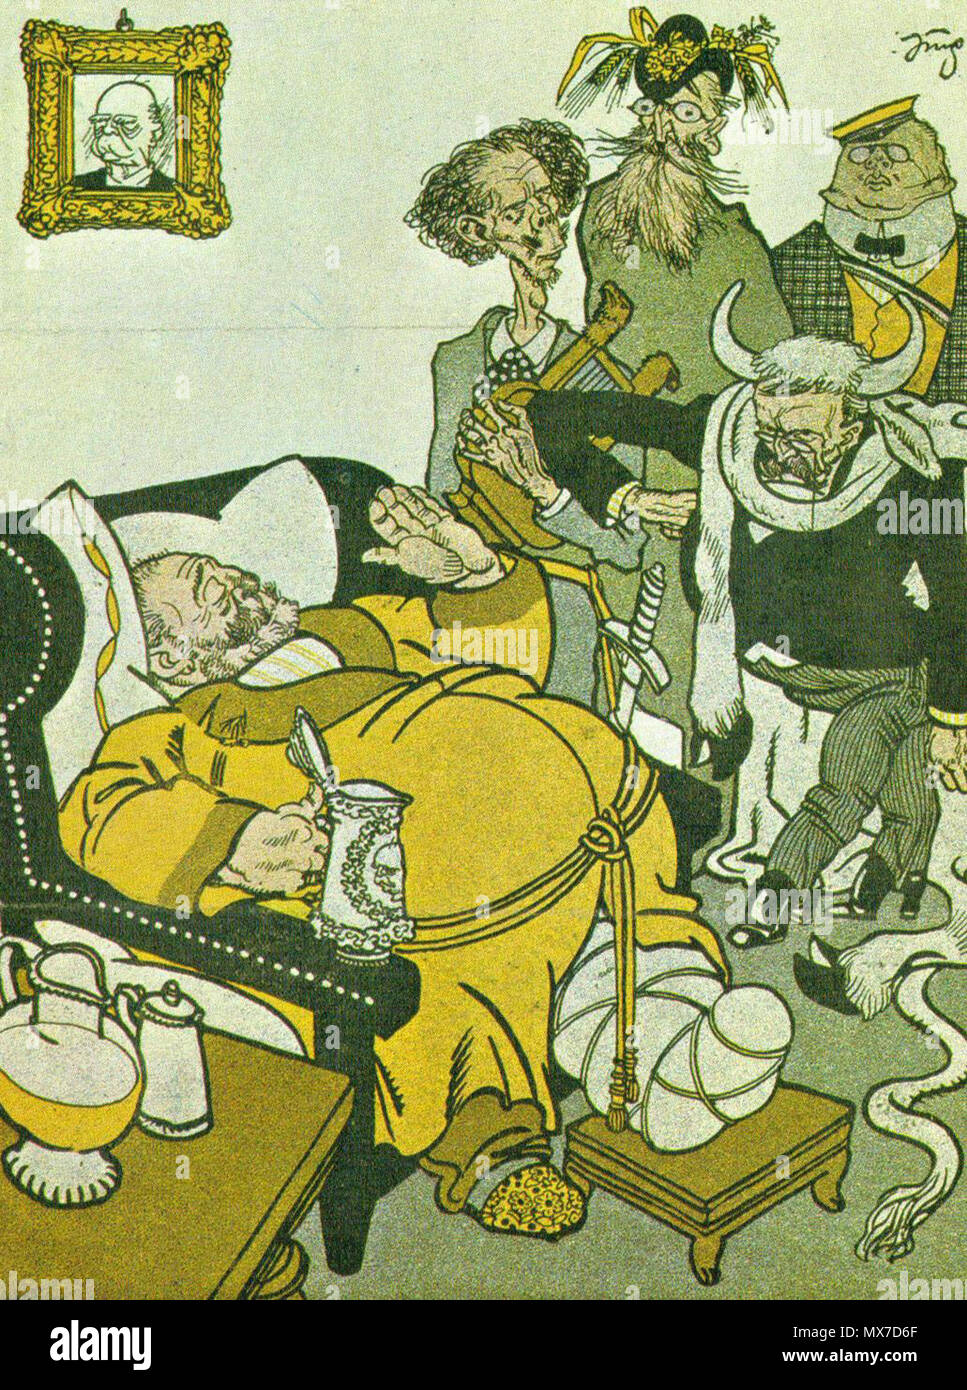 . Austrian politician Georg Schoenerer was sentenced to prison because in 1888 he conducted a raid on a newspaper office that had prematurely published the death notice of Kaiser Willhelm I. While doing so, he was drunk, and thus this political cartoon responds to his situation. . This file is lacking author information. 239 Georg Schoenerer Stock Photo